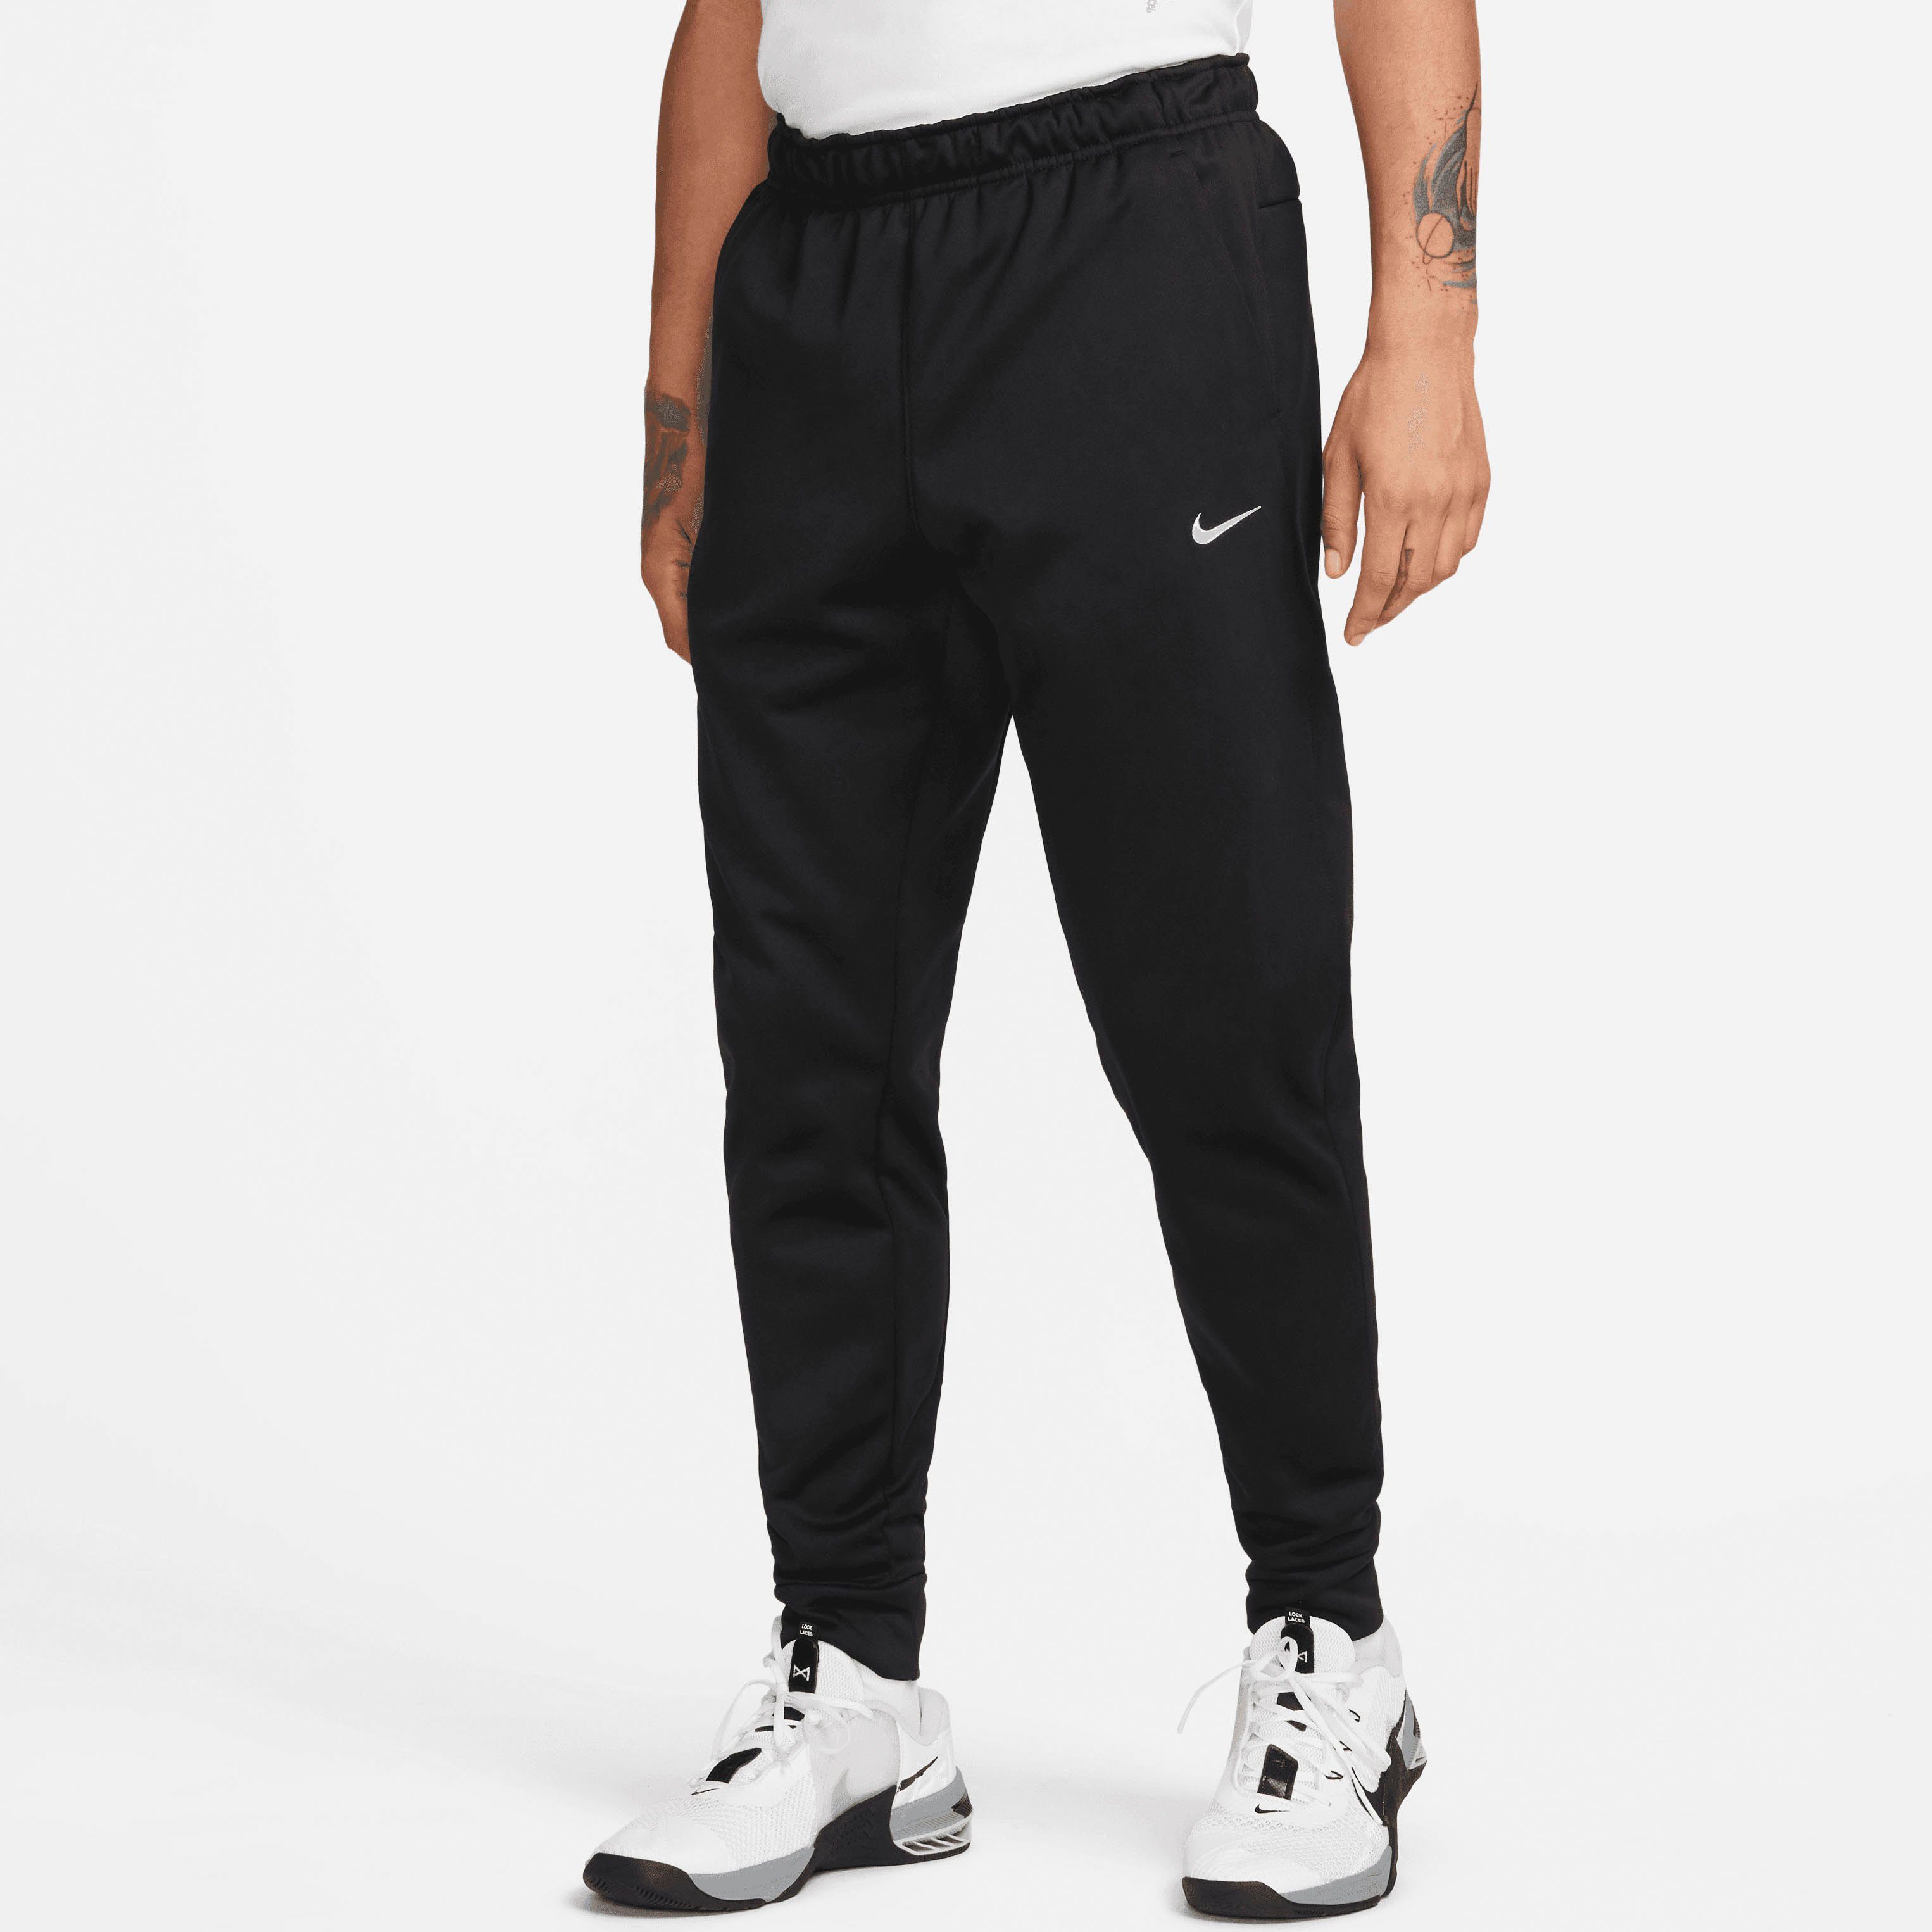 Therma-FIT Pants Men's Tapered Nike Fitness Sporthose